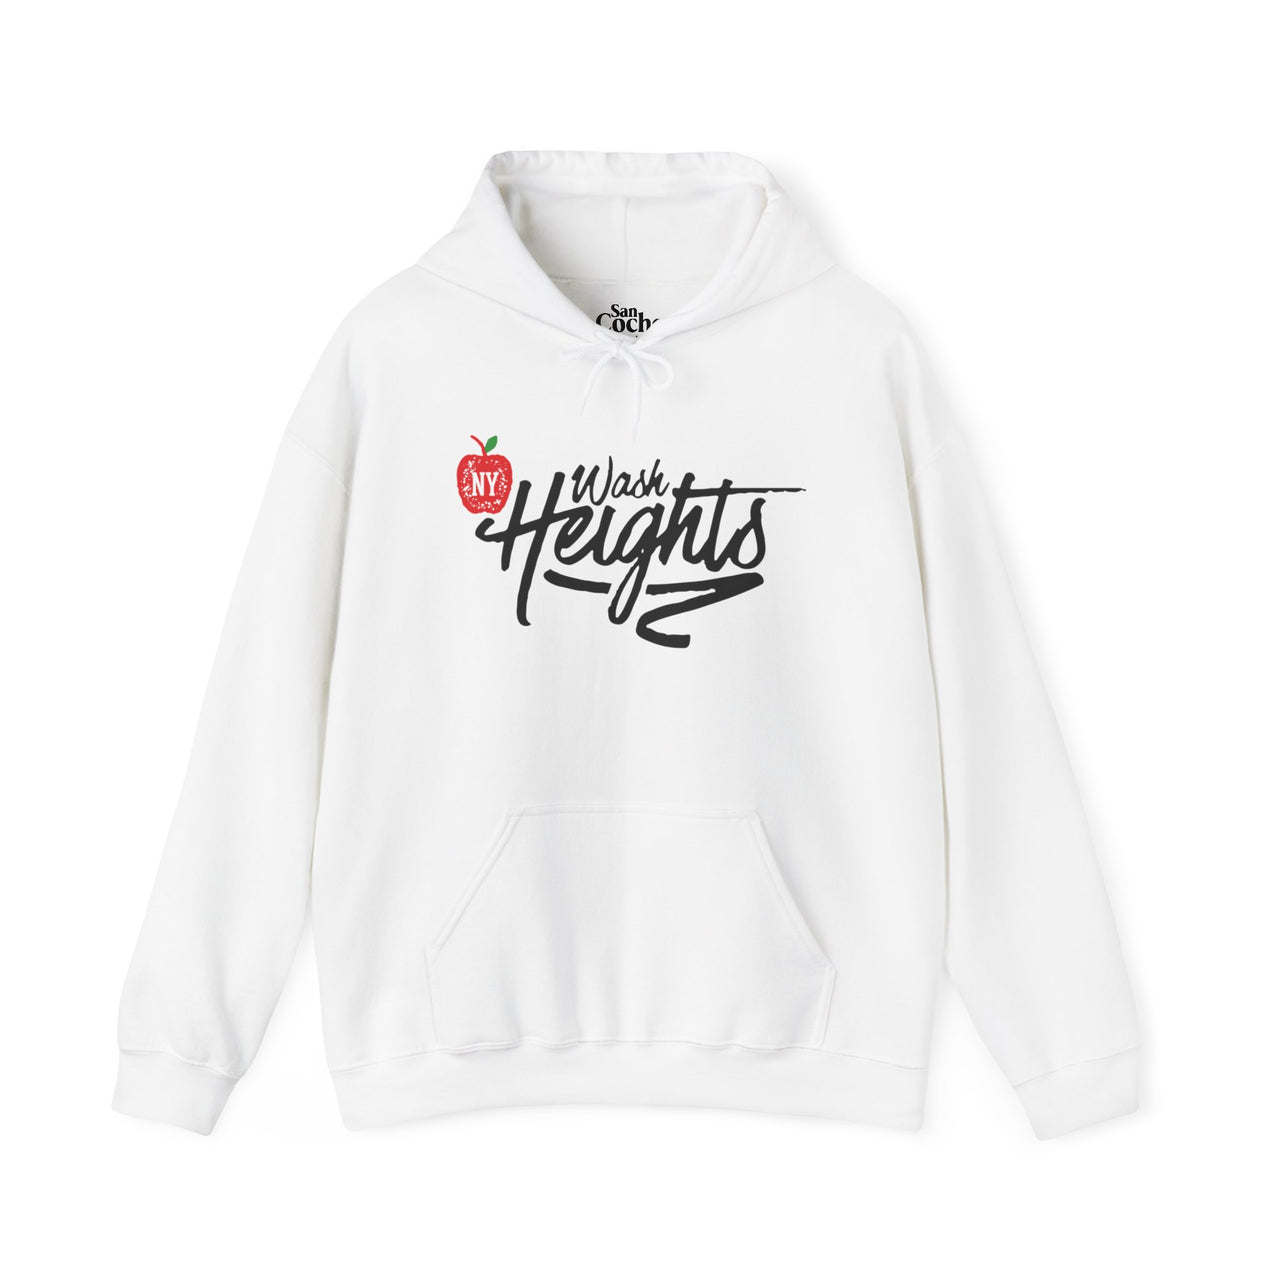 Wash Heights Graphic Oversized Hoodie | Represent Washington Heights Pullover